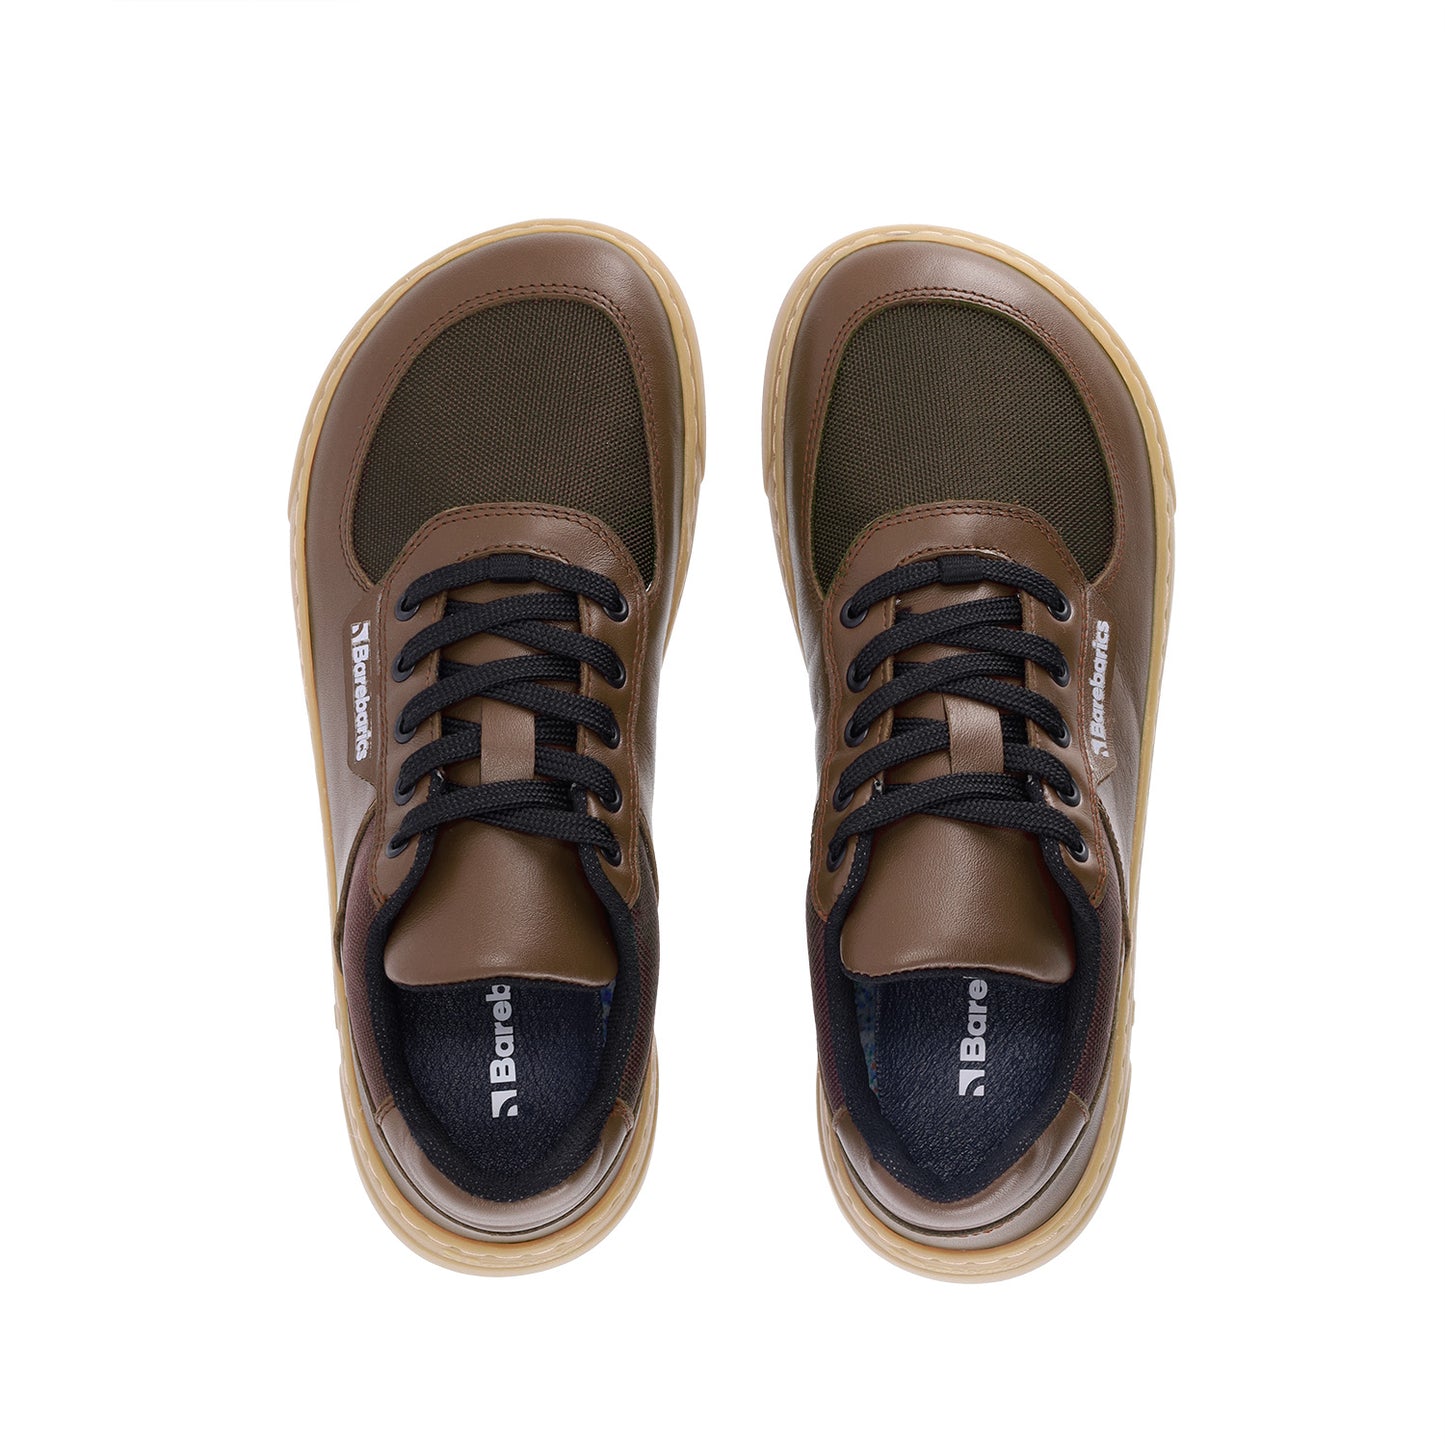 ["Get to know the real comfort with Barebarics Bravo barefoot shoes, designed for casual wear. The combination of leather and textile offers you everlasting comfort and effortless match with various outfits. Embrace barefoot living and enjoy the benefits it brings."]